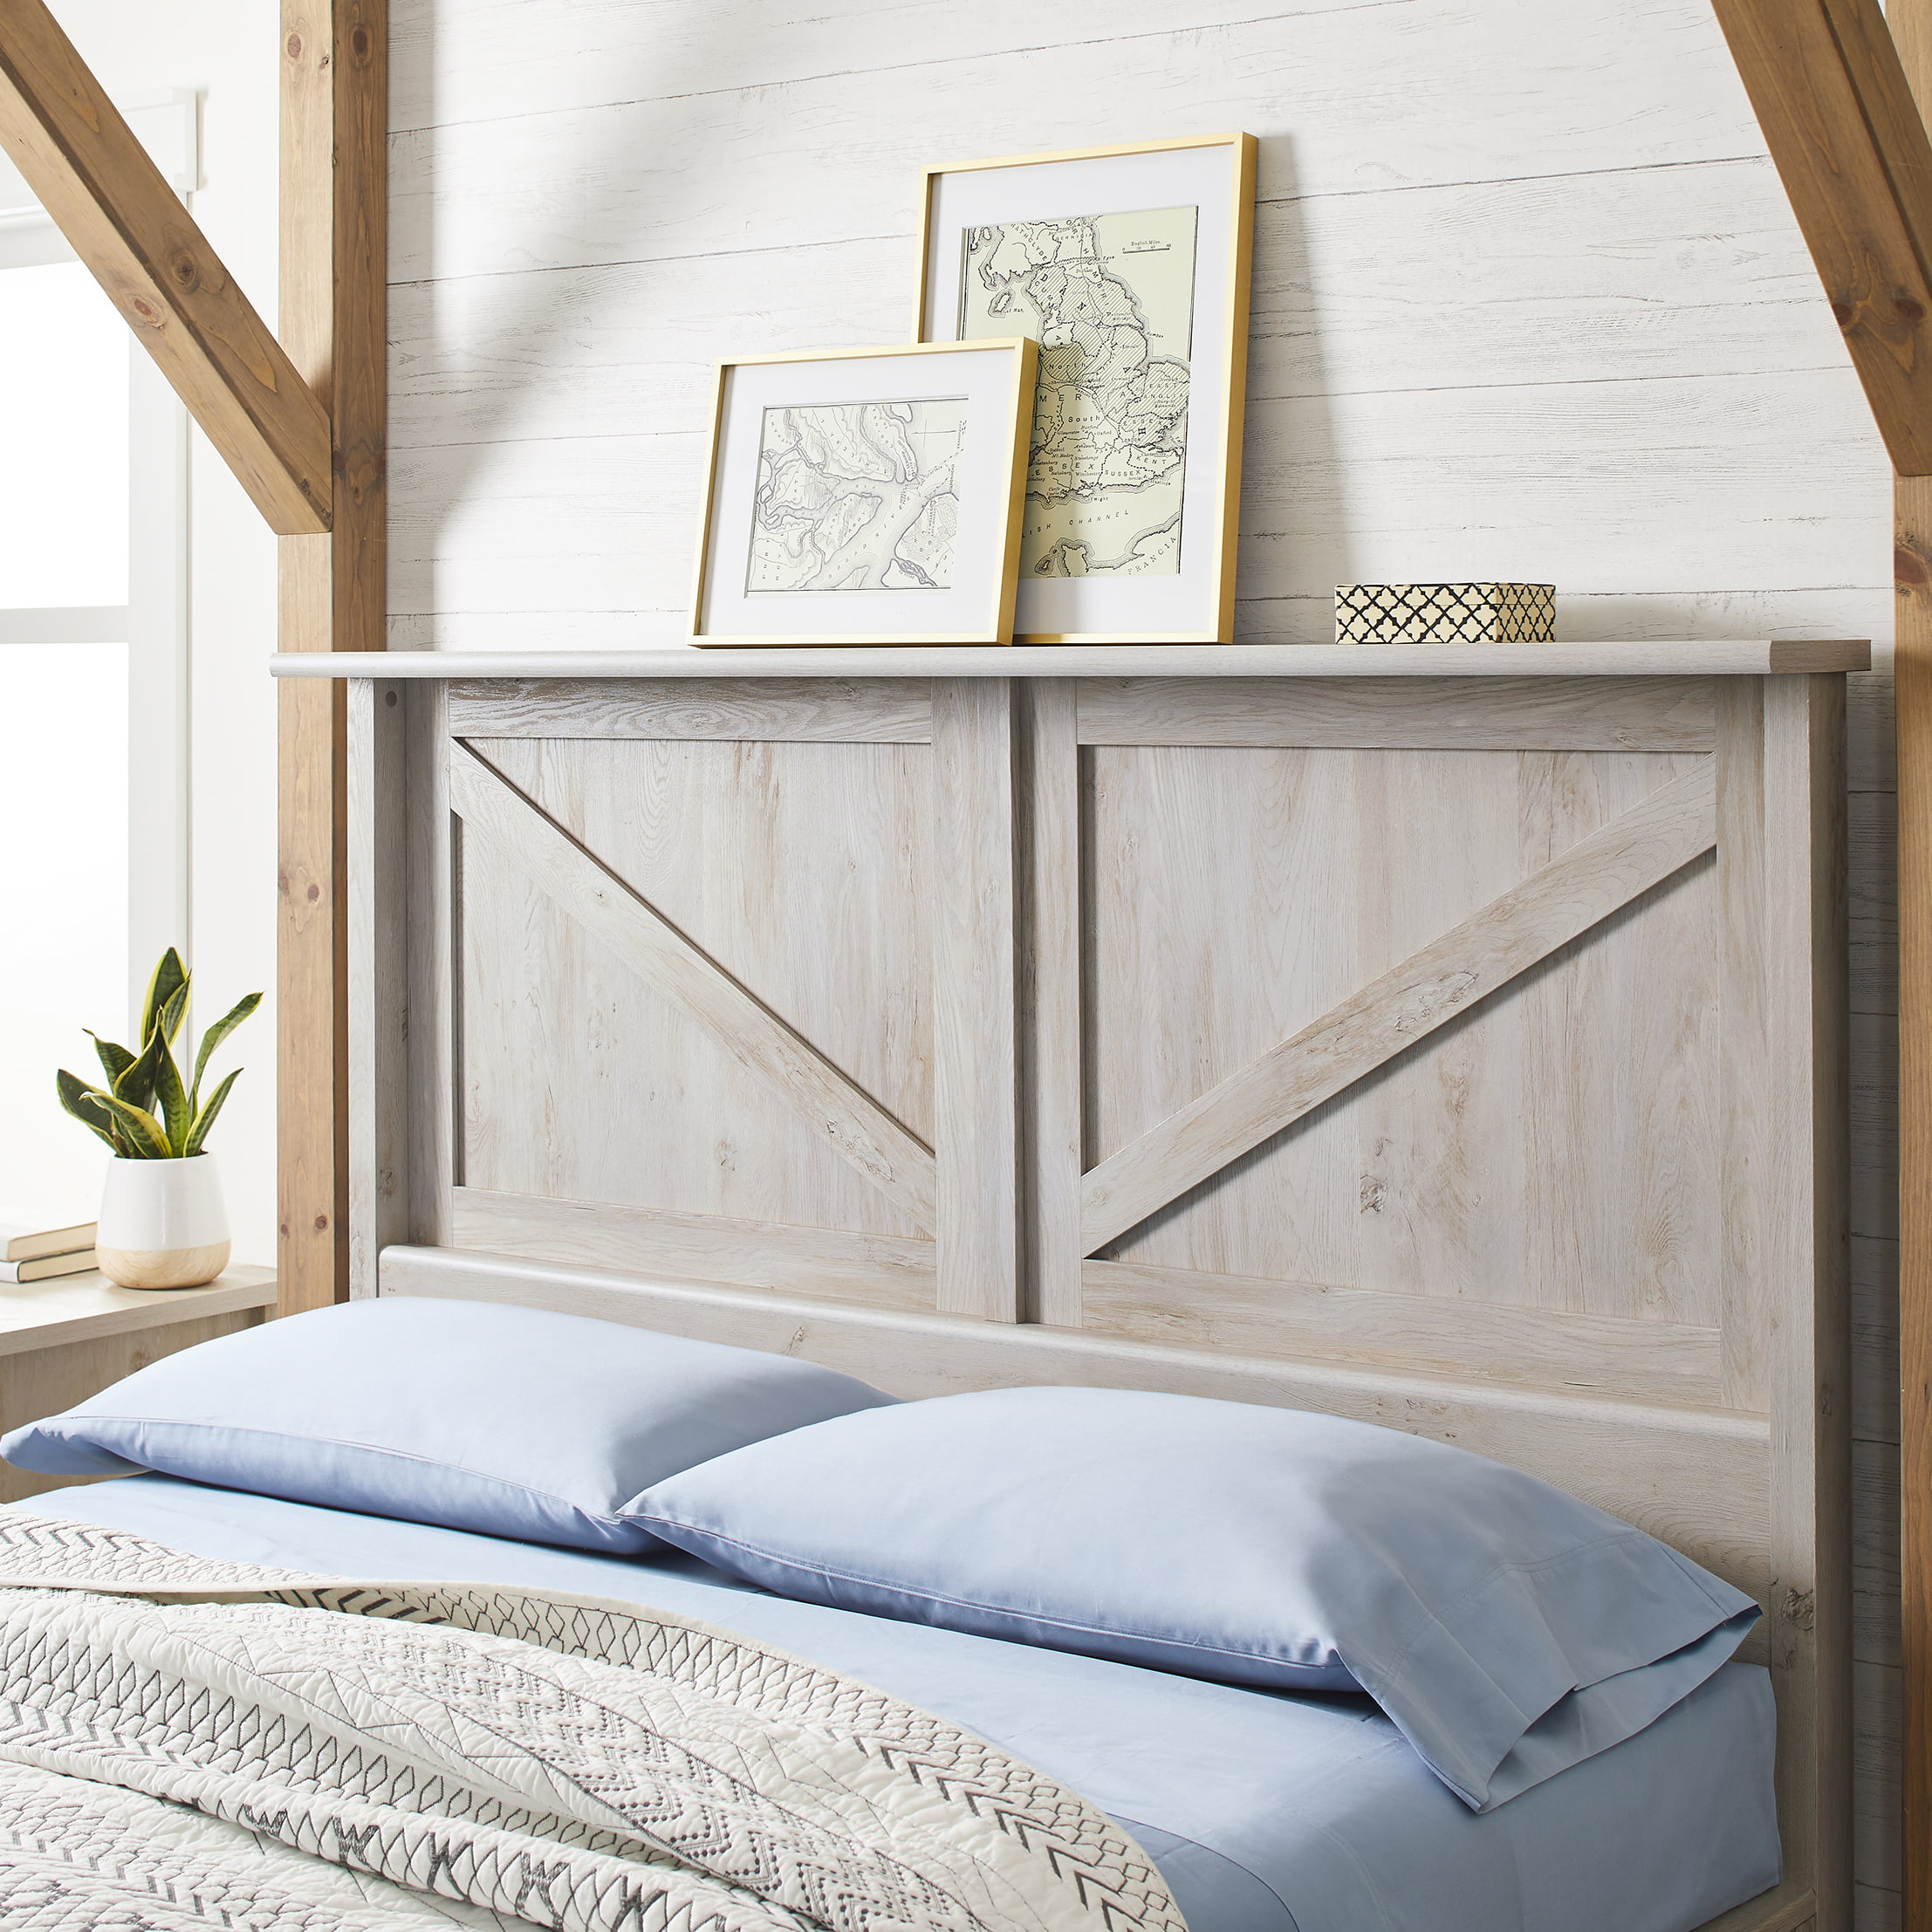 New Modern Headboards with Simple Decor